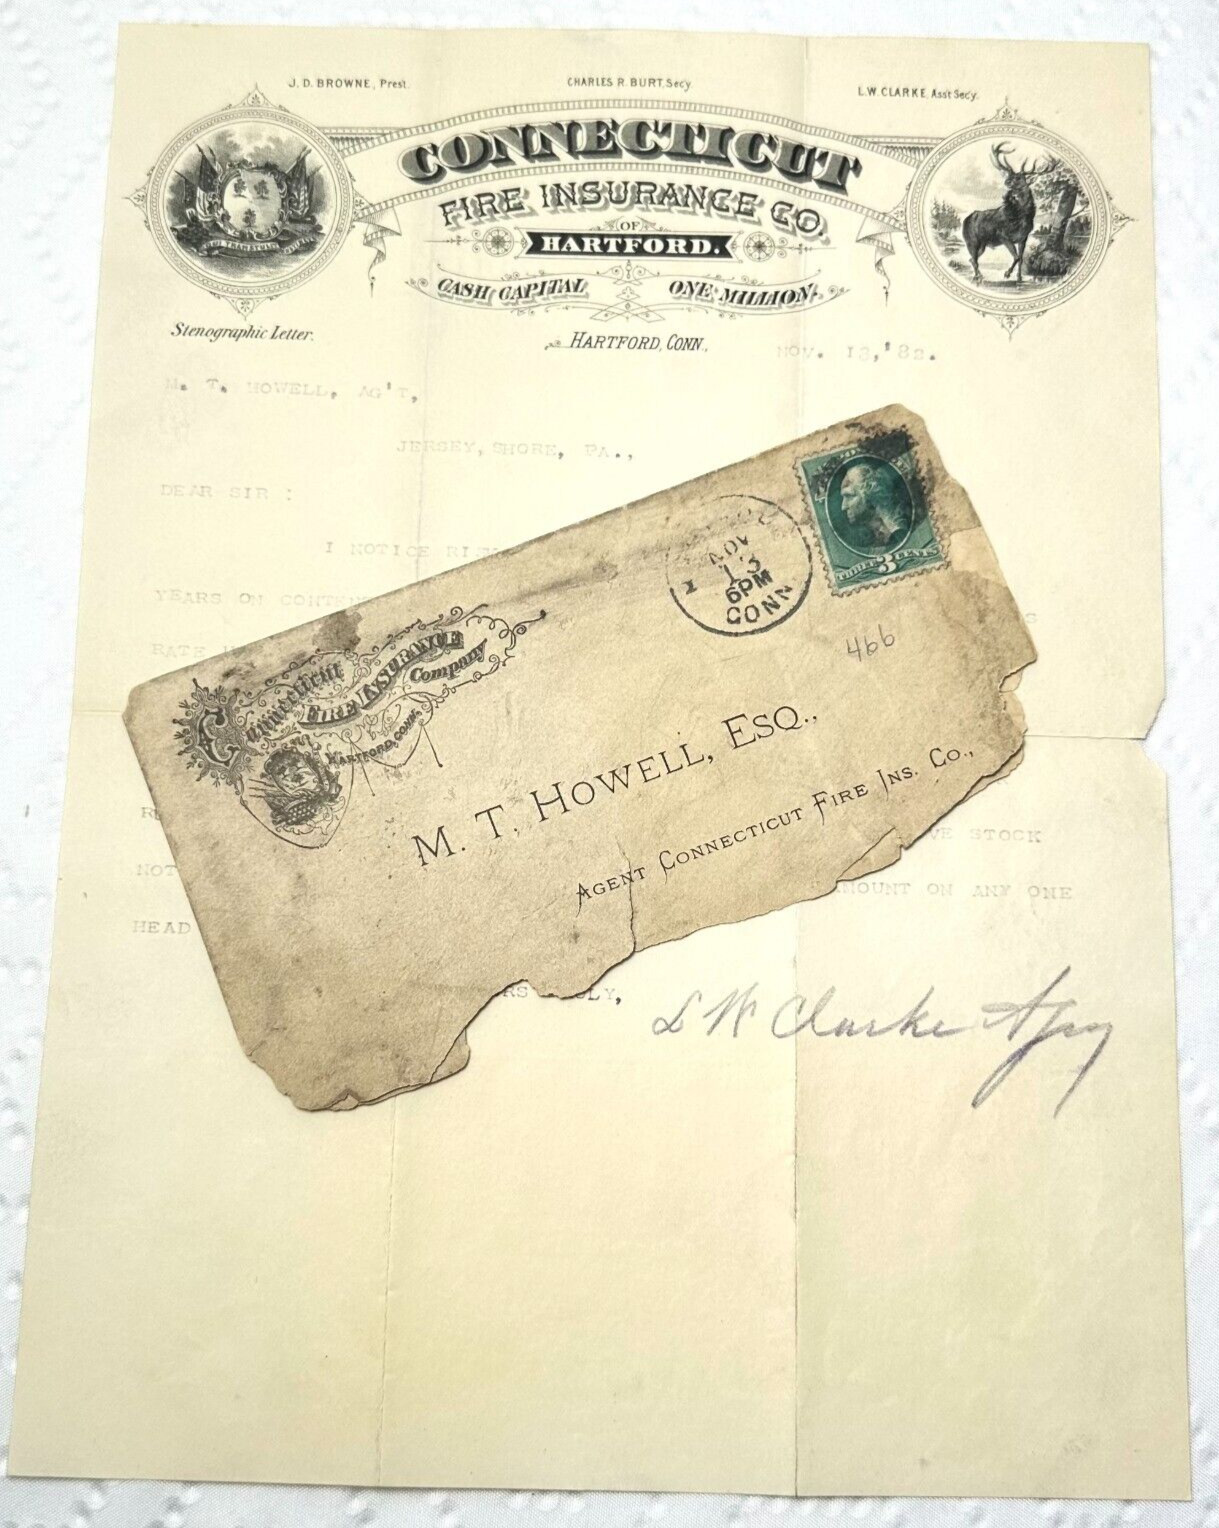 1882 Connecticut Fire insurance Co Letter Cover to M T Howell Esq HARTFORD AA250